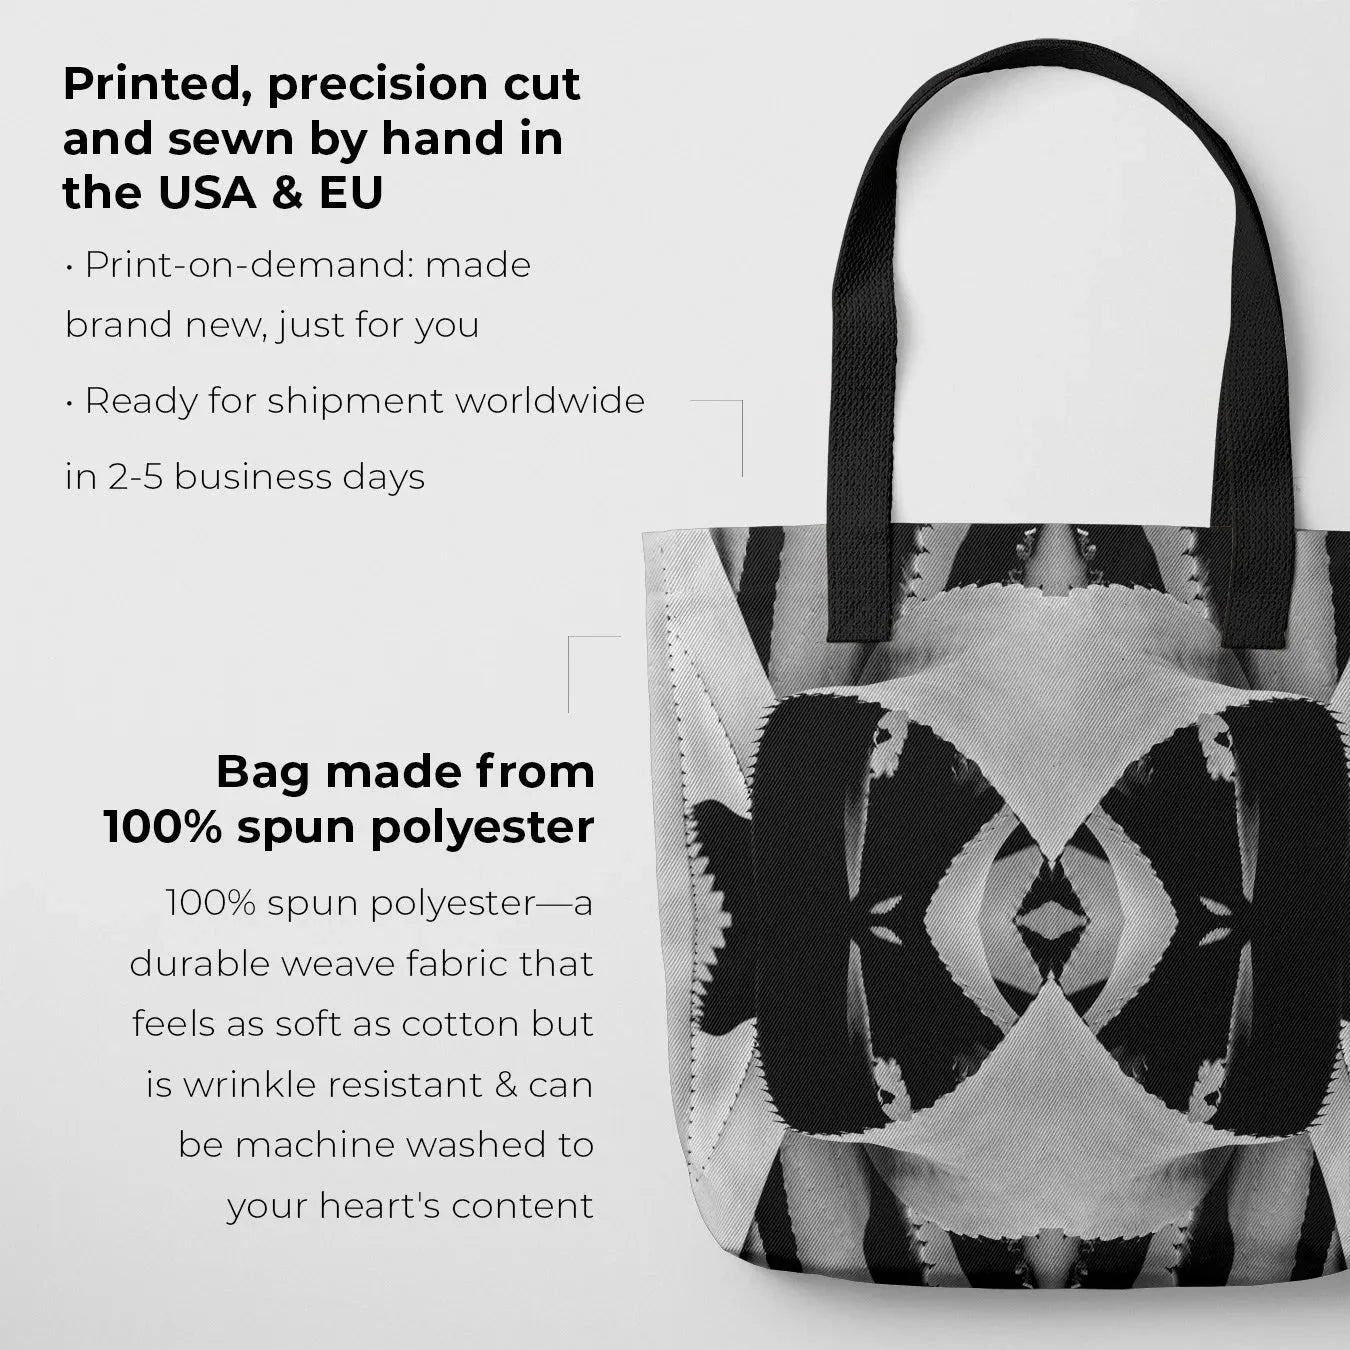 Oh So Succulent Tote - Black And White - Heavy Duty Reusable Grocery Bag - Shopping Totes - Aesthetic Art